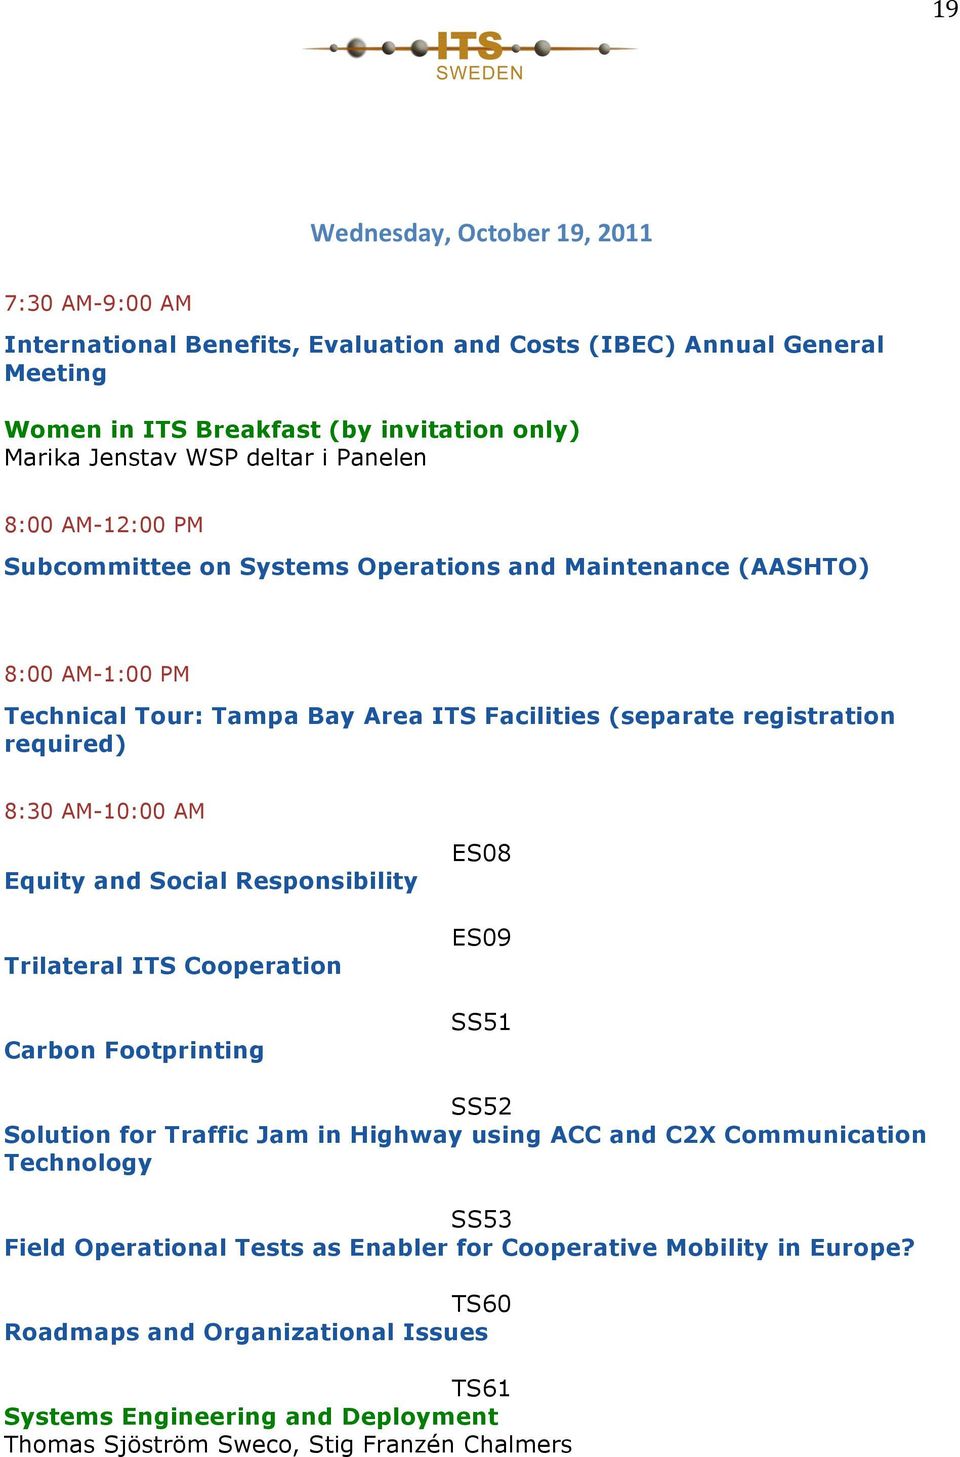 AM-10:00 AM Equity and Social Responsibility Trilateral ITS Cooperation Carbon Footprinting ES08 ES09 SS51 SS52 Solution for Traffic Jam in Highway using ACC and C2X Communication Technology